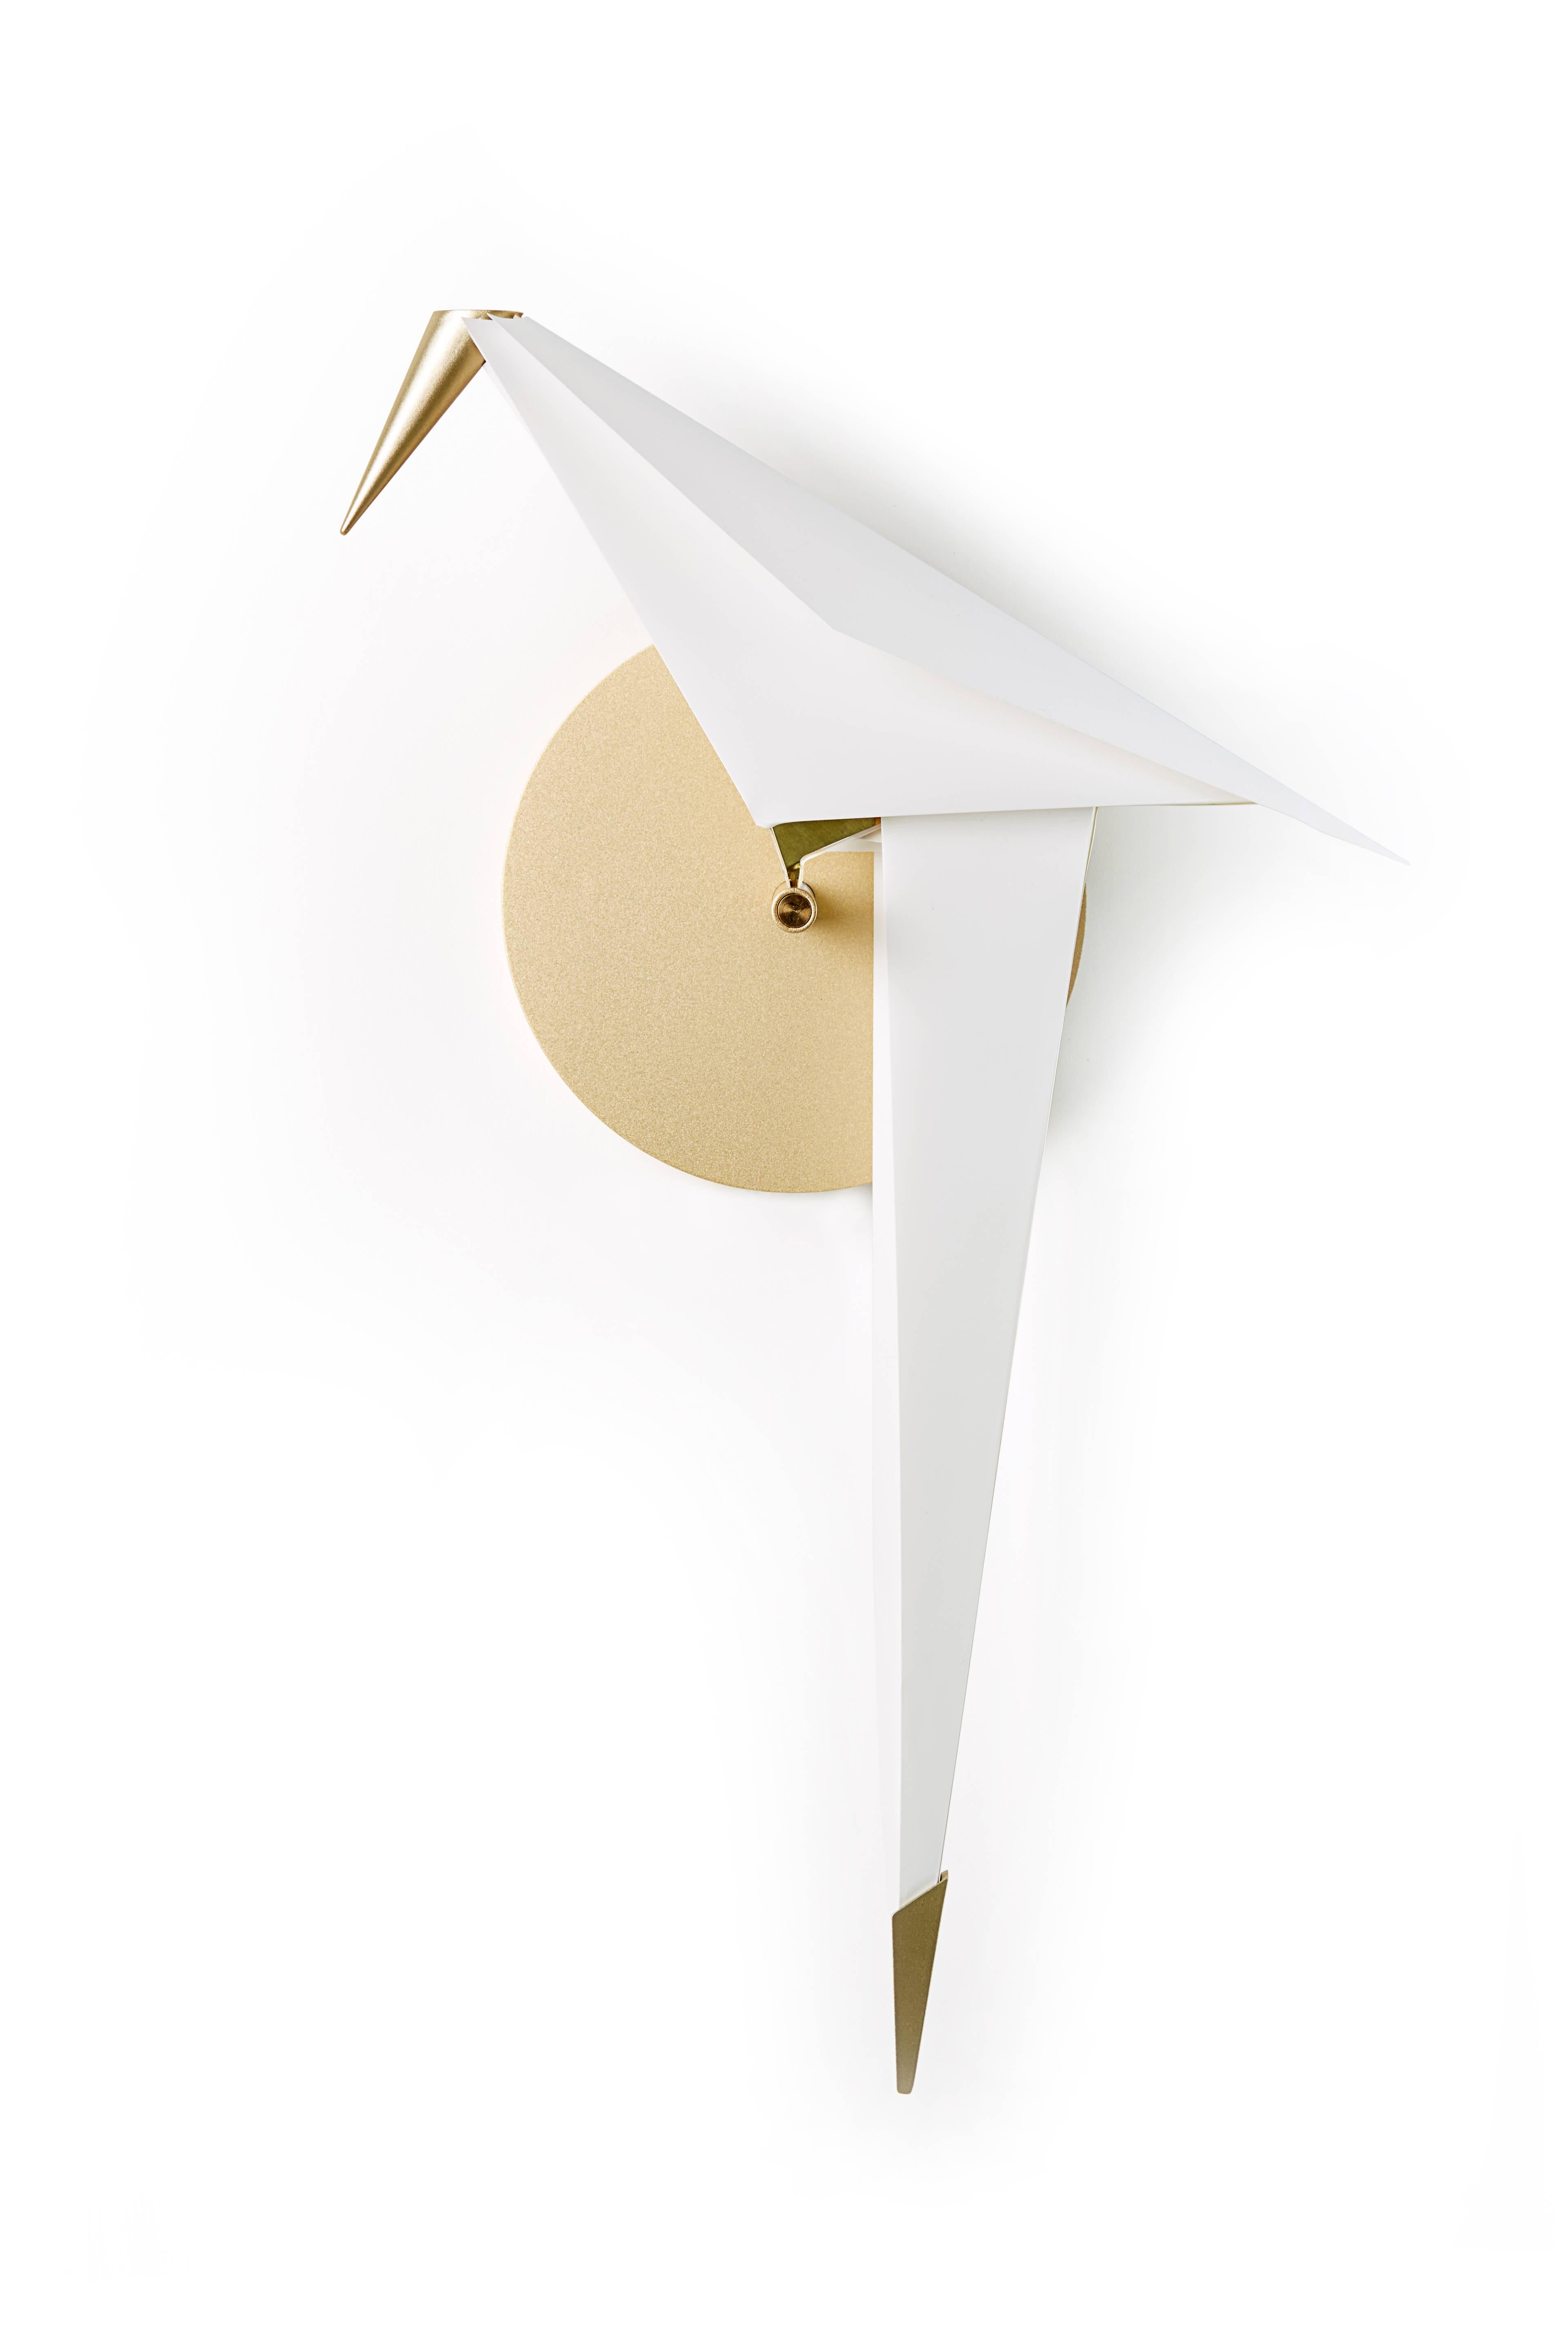 Contemporary Moooi Perch LED Wall Sconce Light in Brass with Large White Bird For Sale